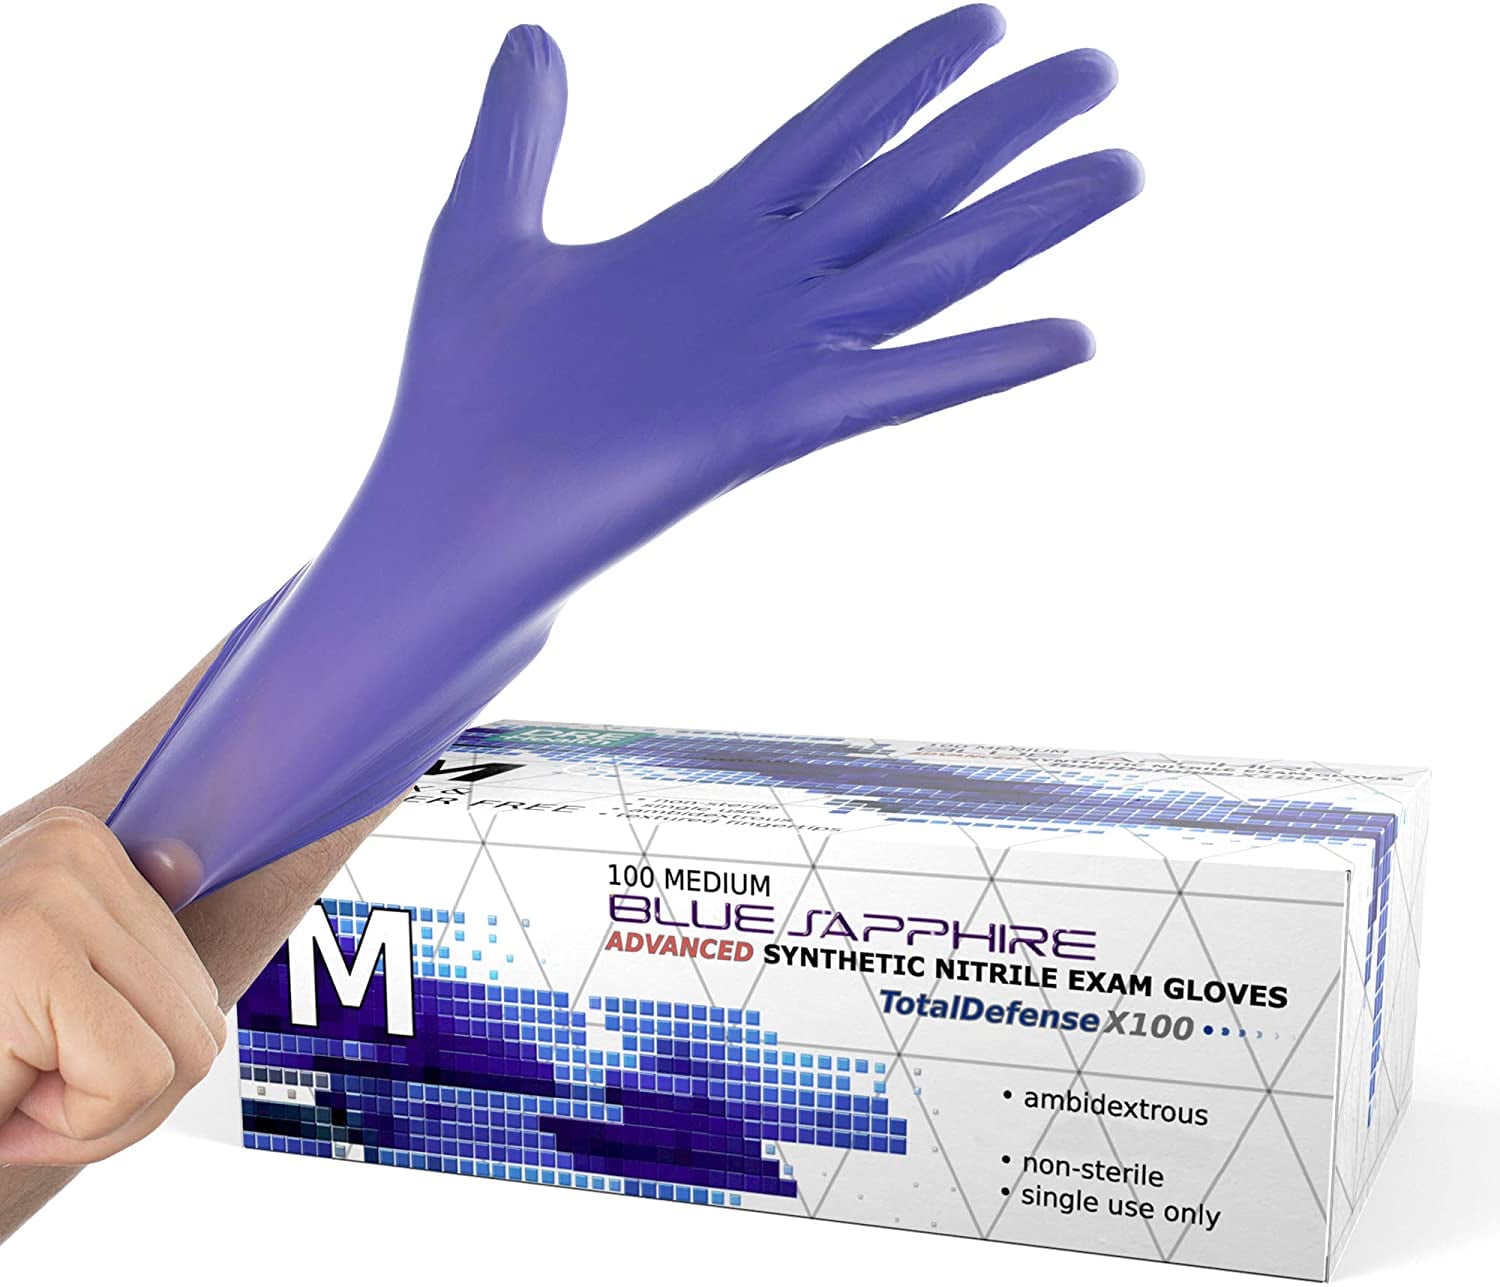 200 SMALL BLUE NITRILE DISPOSABLE GLOVES POWDER FREE & LATEX FREE MEDICAL NITREX 